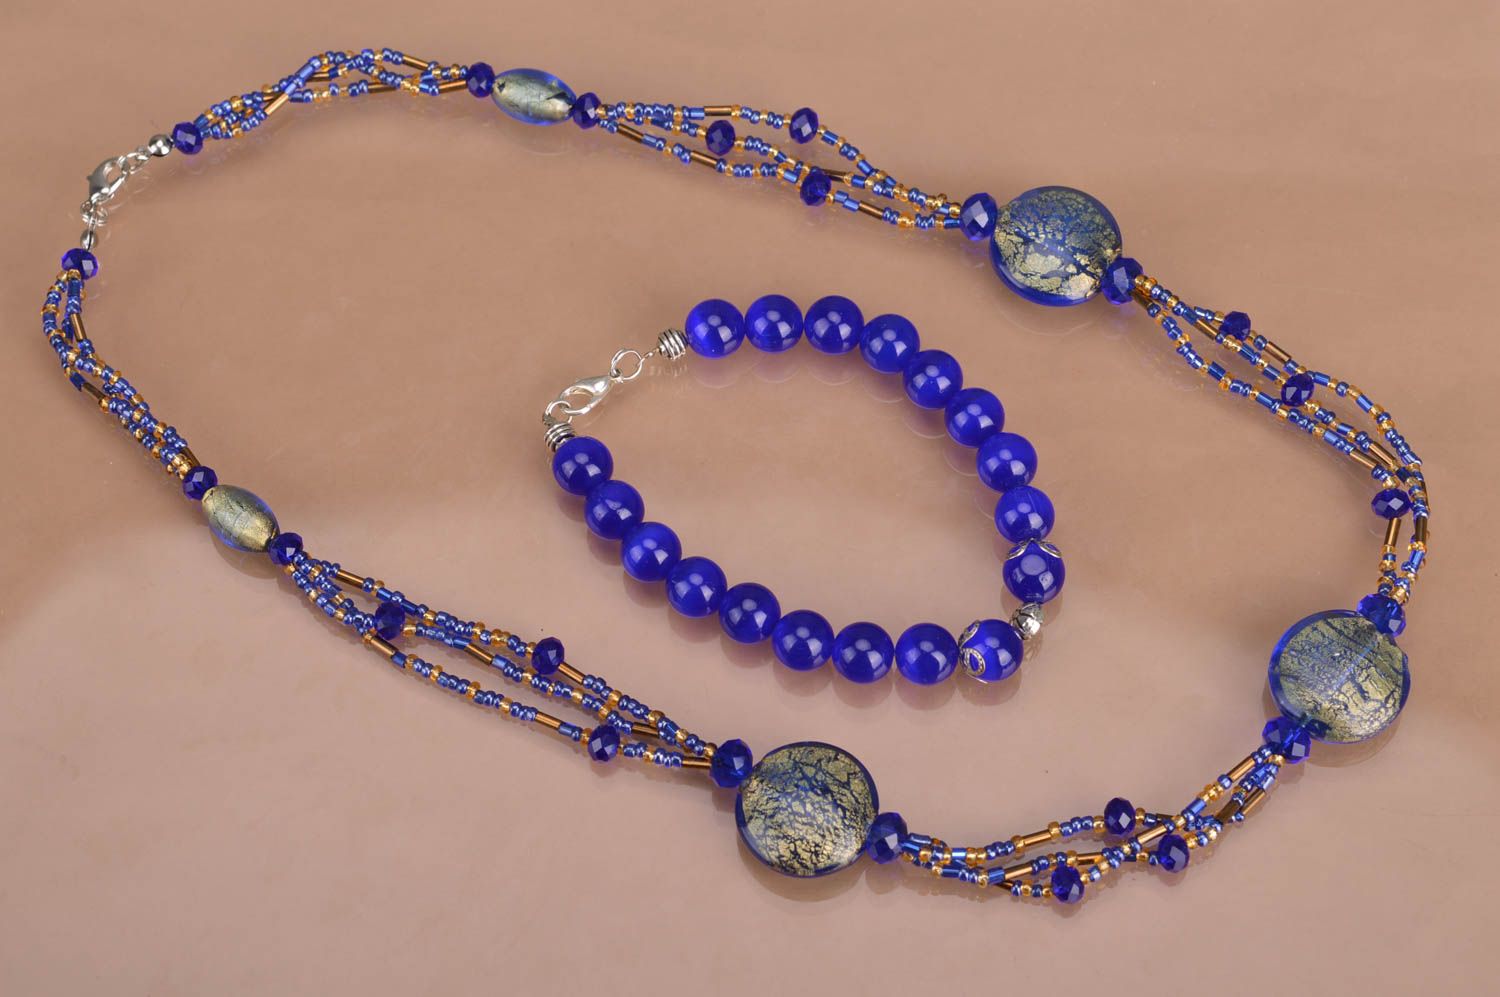 Handmade blue and golden beaded jewelry set wrist bracelet and long necklace photo 2